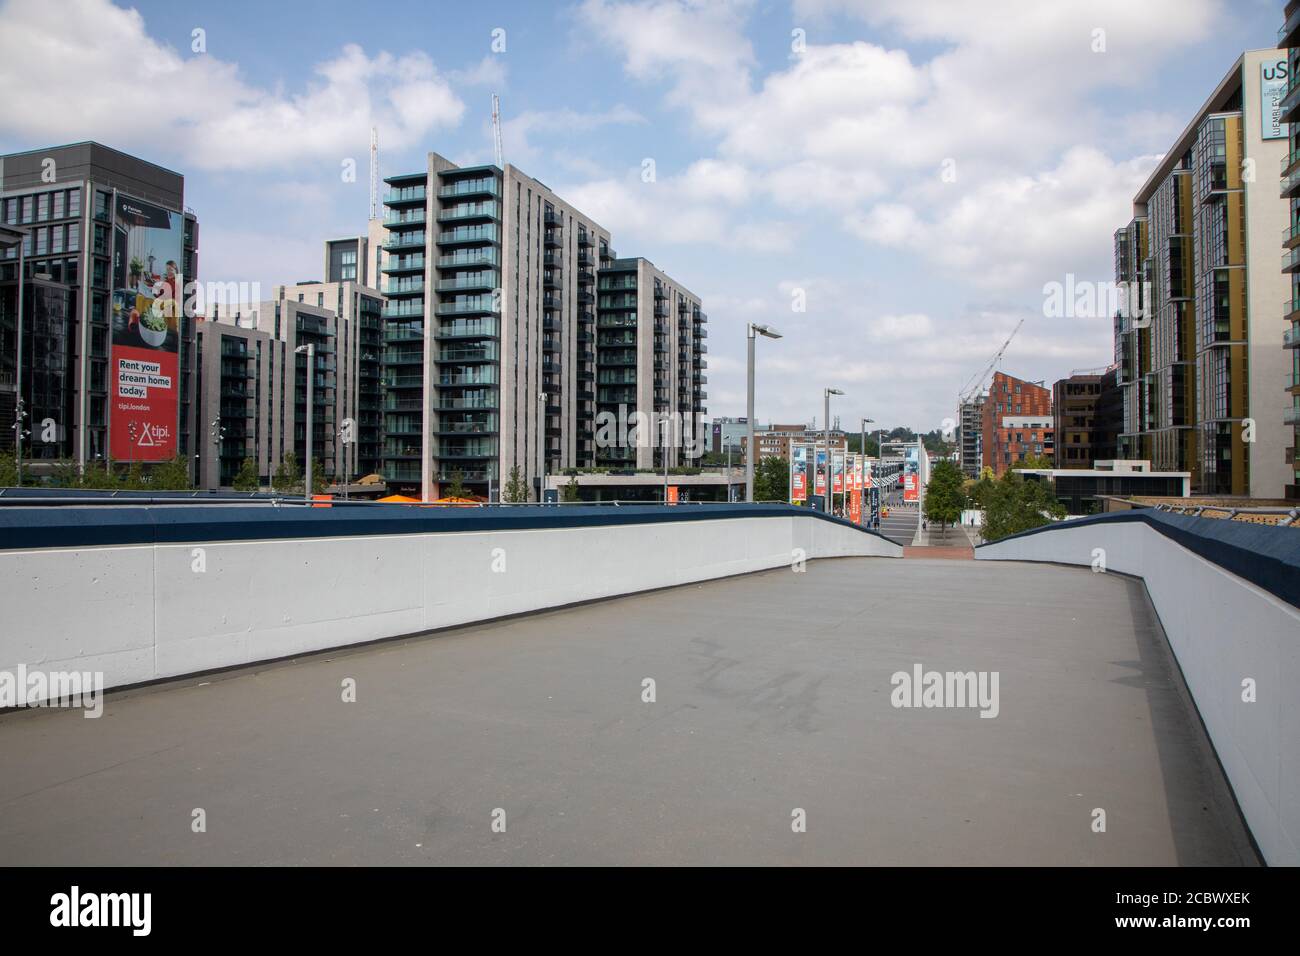 Wembley, with the stadium behind and out of view. This picture shows a pedestrian ramp with new high rise housing. Olympic Way is in the distance. Stock Photo